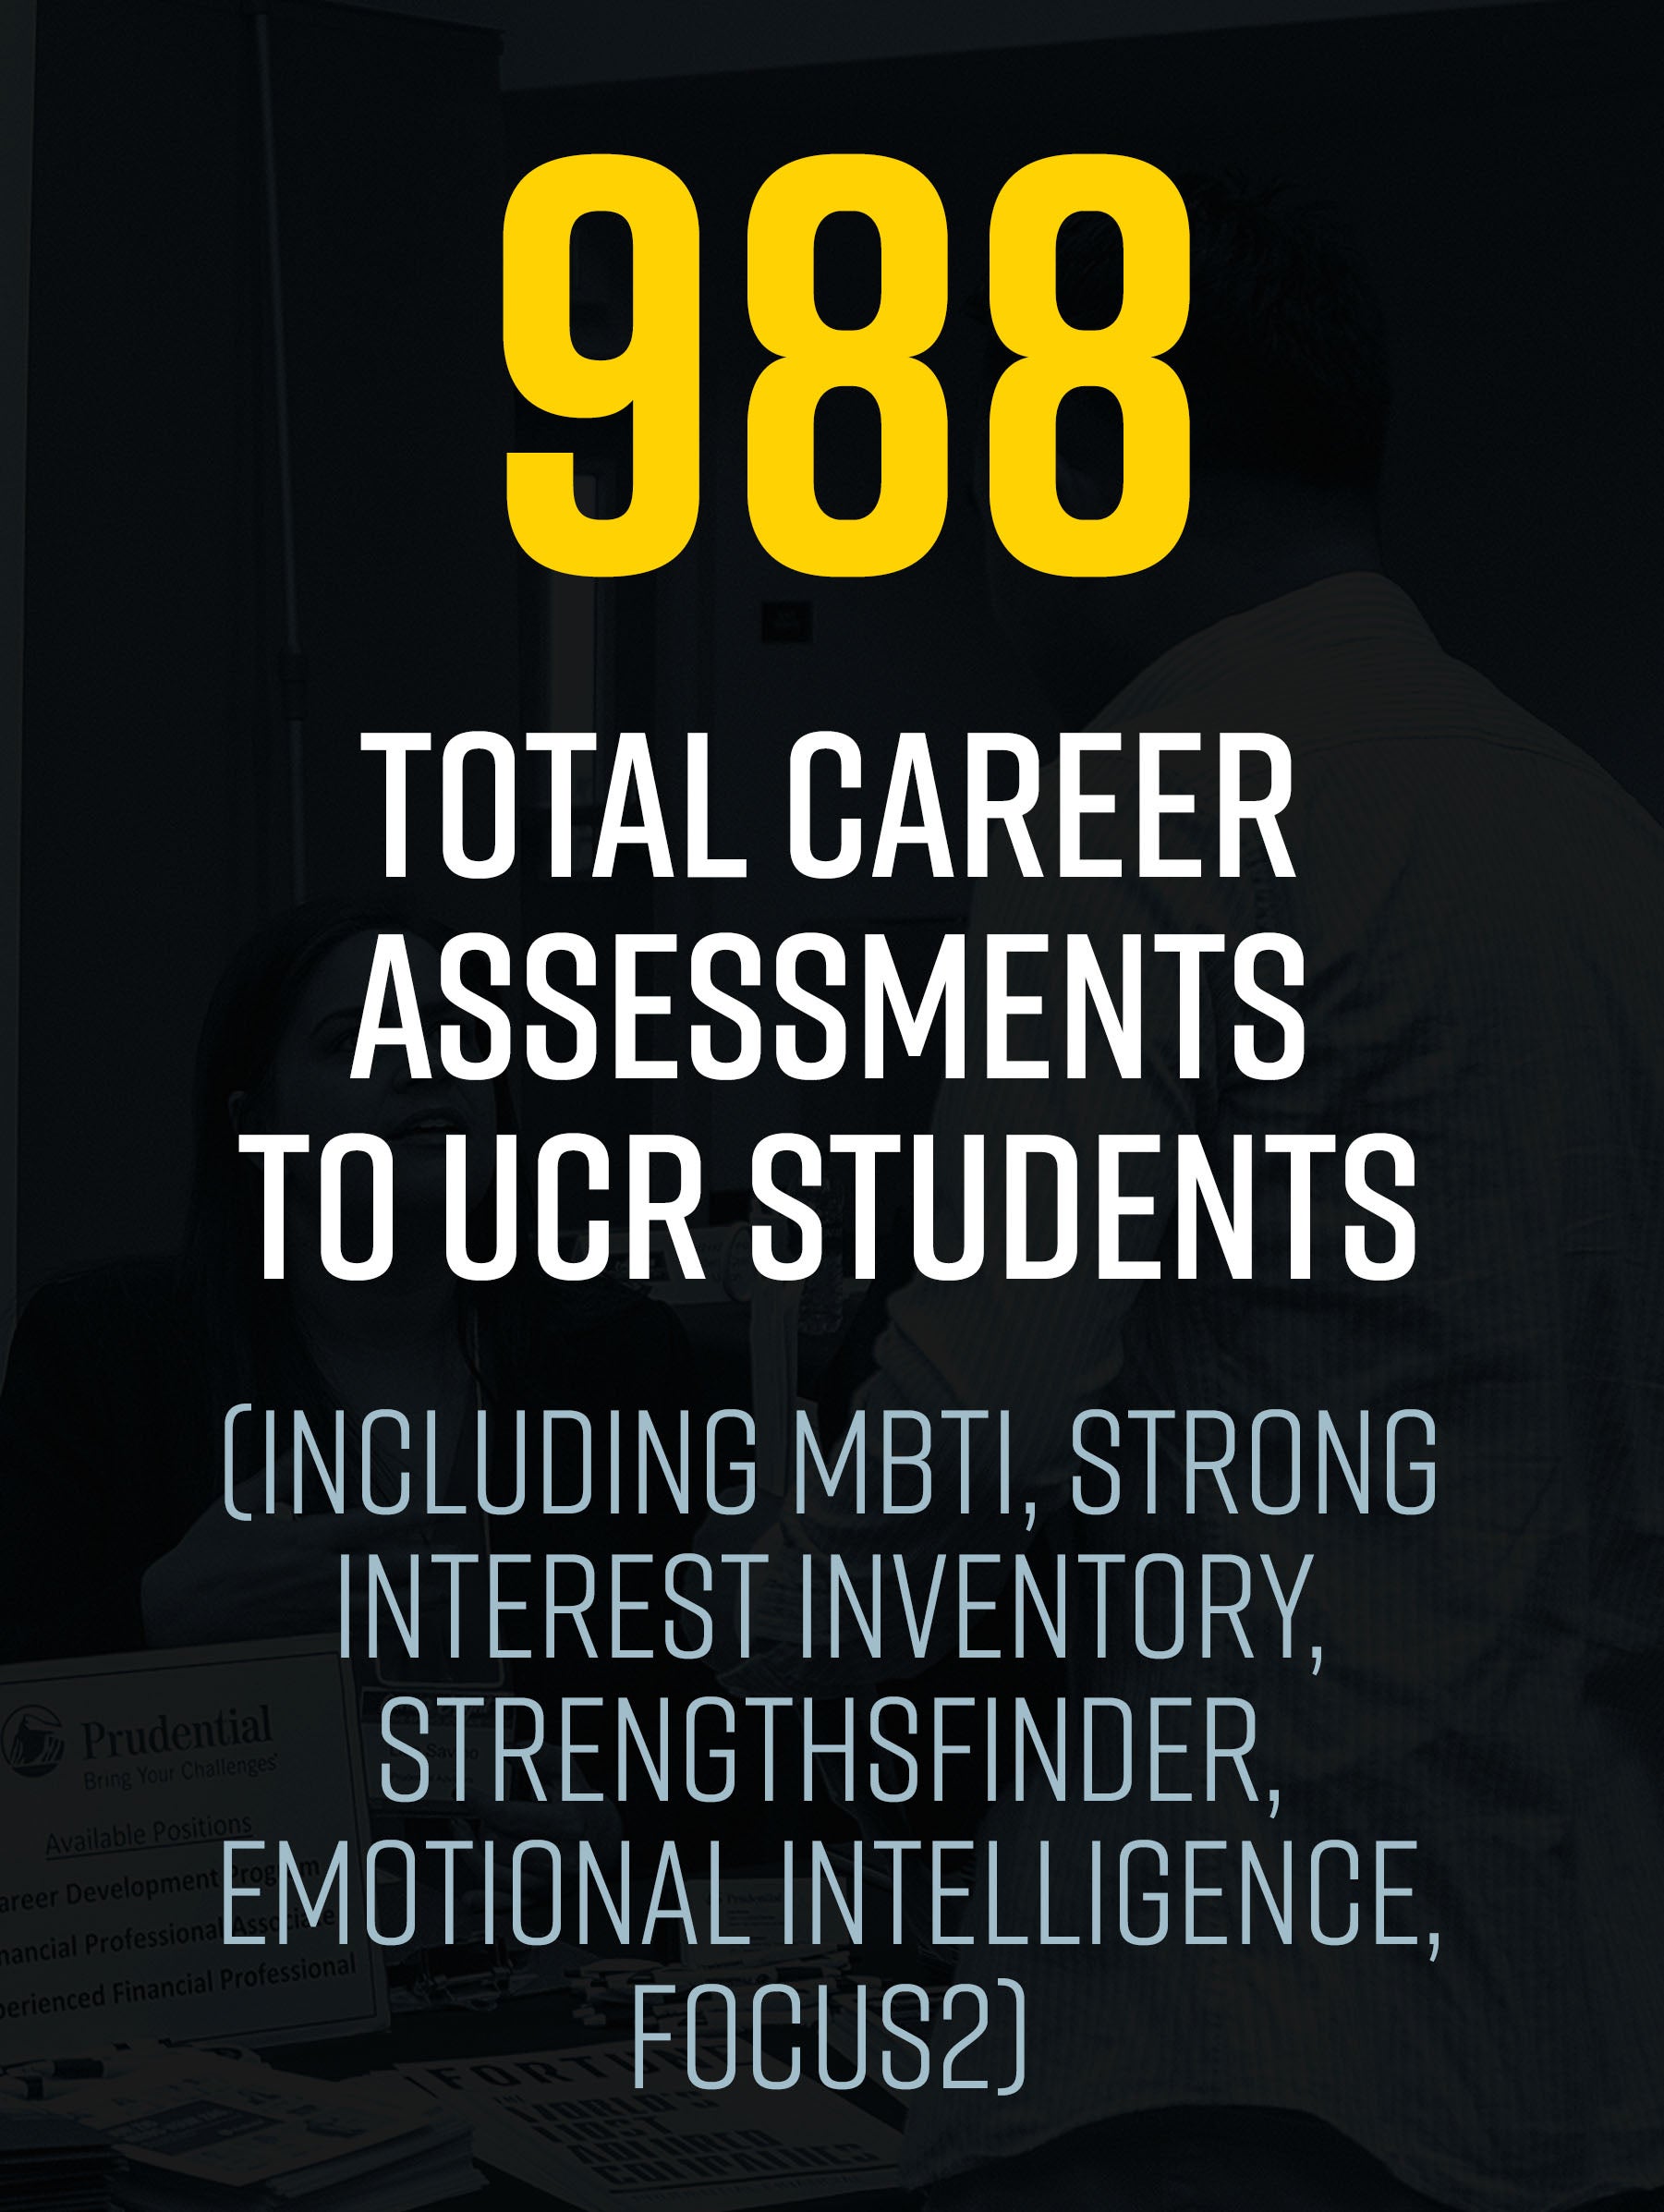 Total Career Assessments to UCR Students 20-21